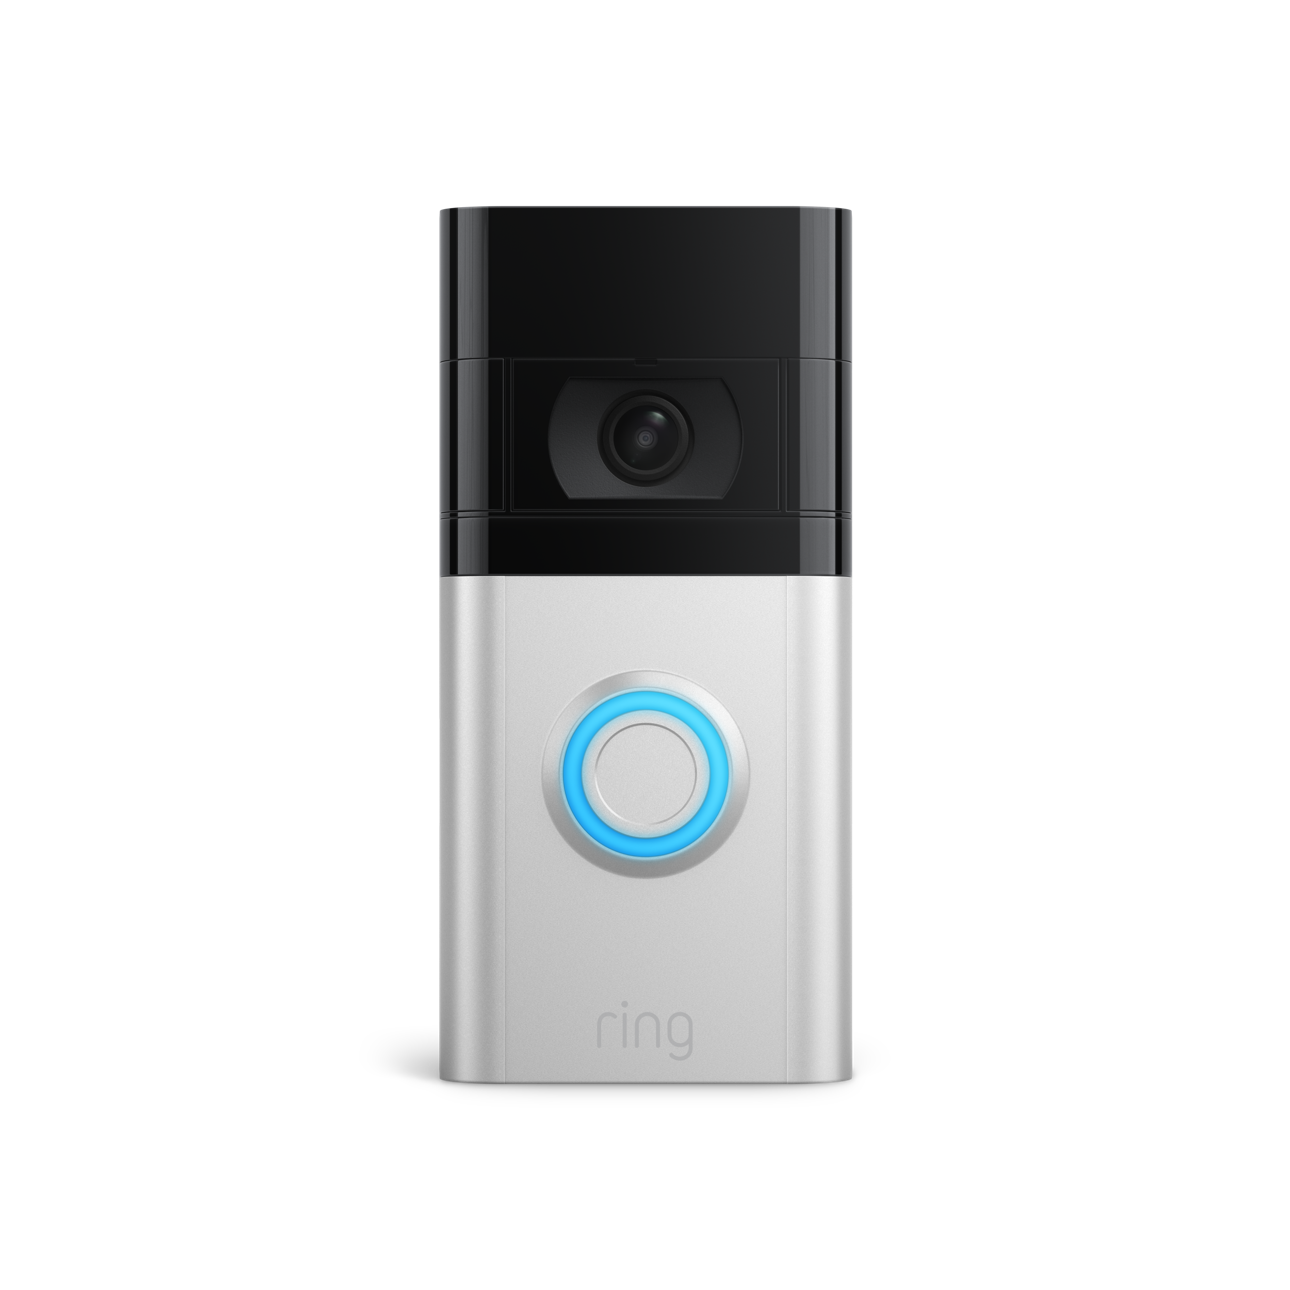 Ring Smart Video Doorbell 3 Plus with Built-in Wi-Fi & Camera - Refurbished Good